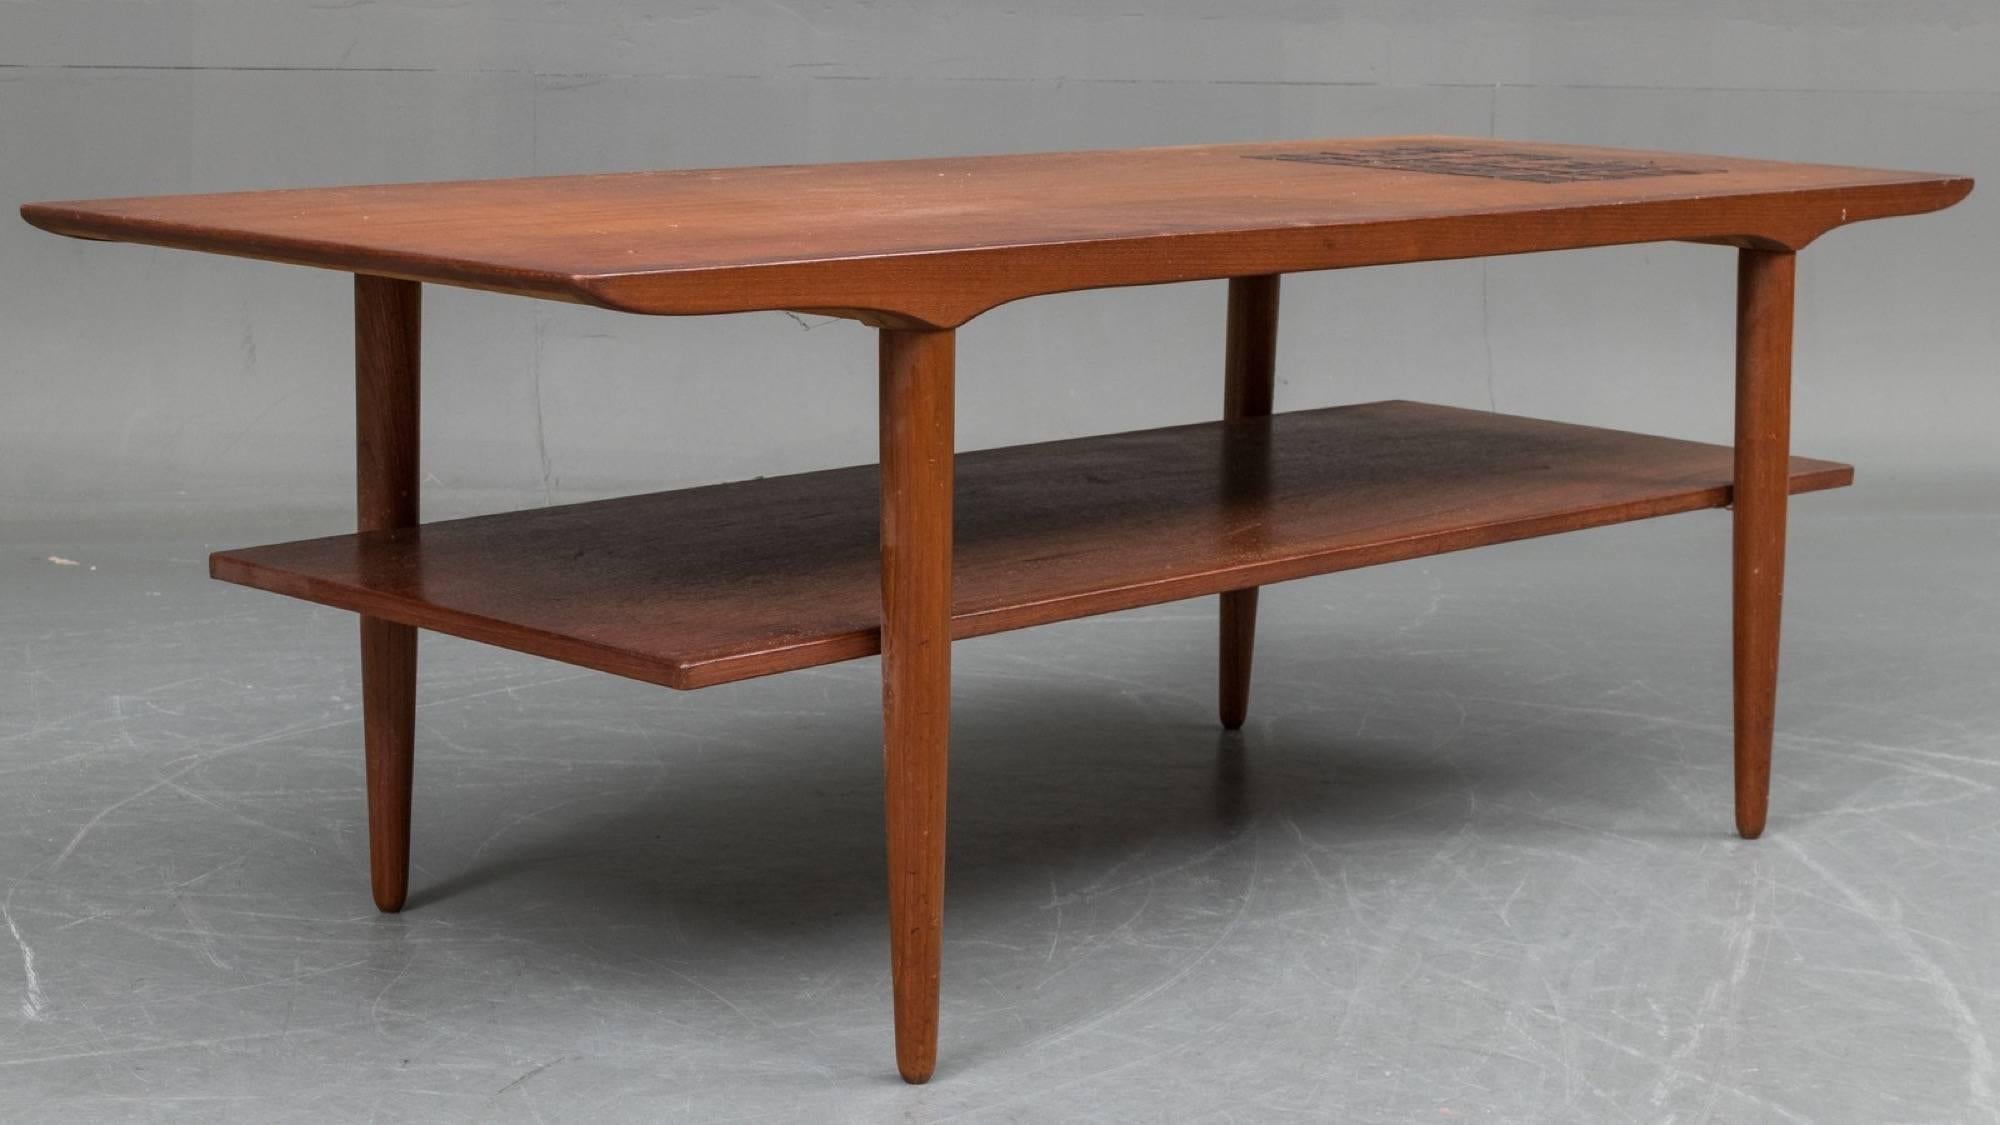 Teak wood and tile coffee table with second shelf. Danish furniture manufacturer, 1960s.